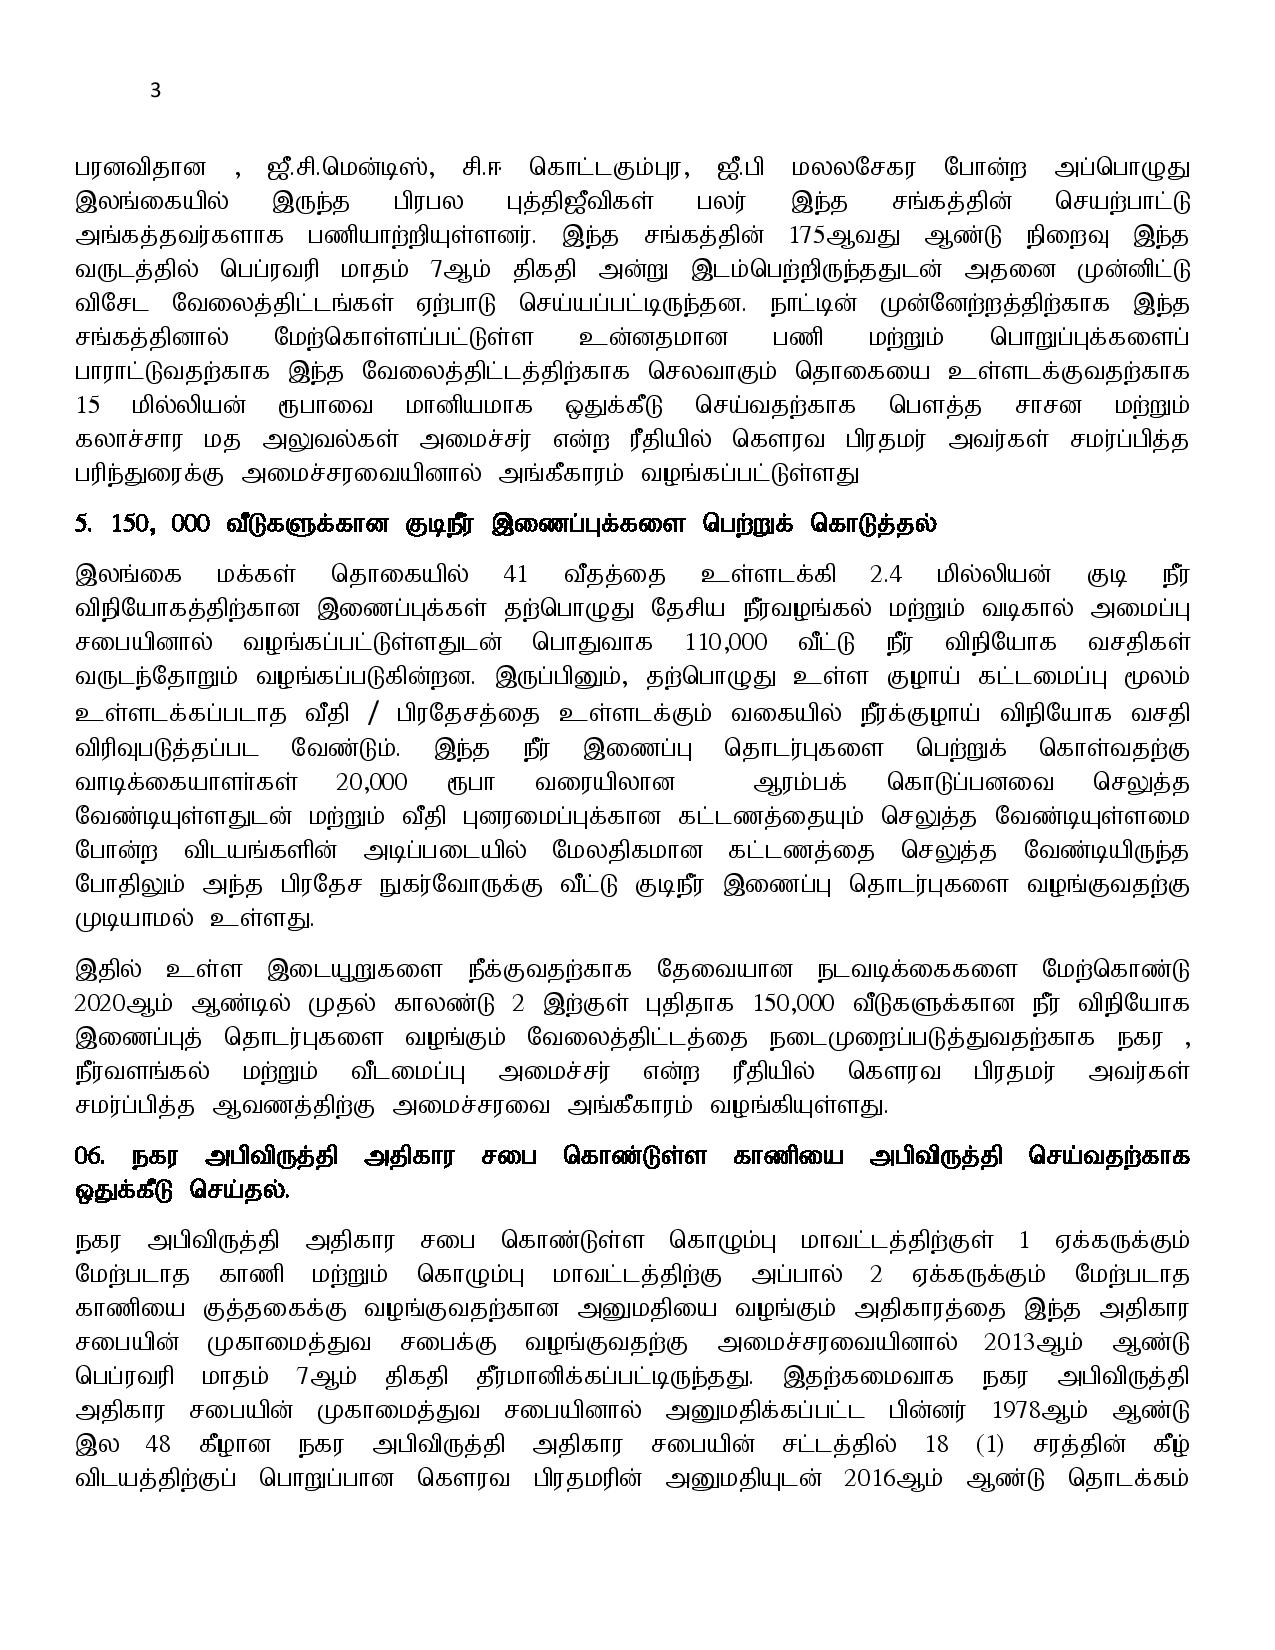 04.03.2020 cabinet Tamil page 003